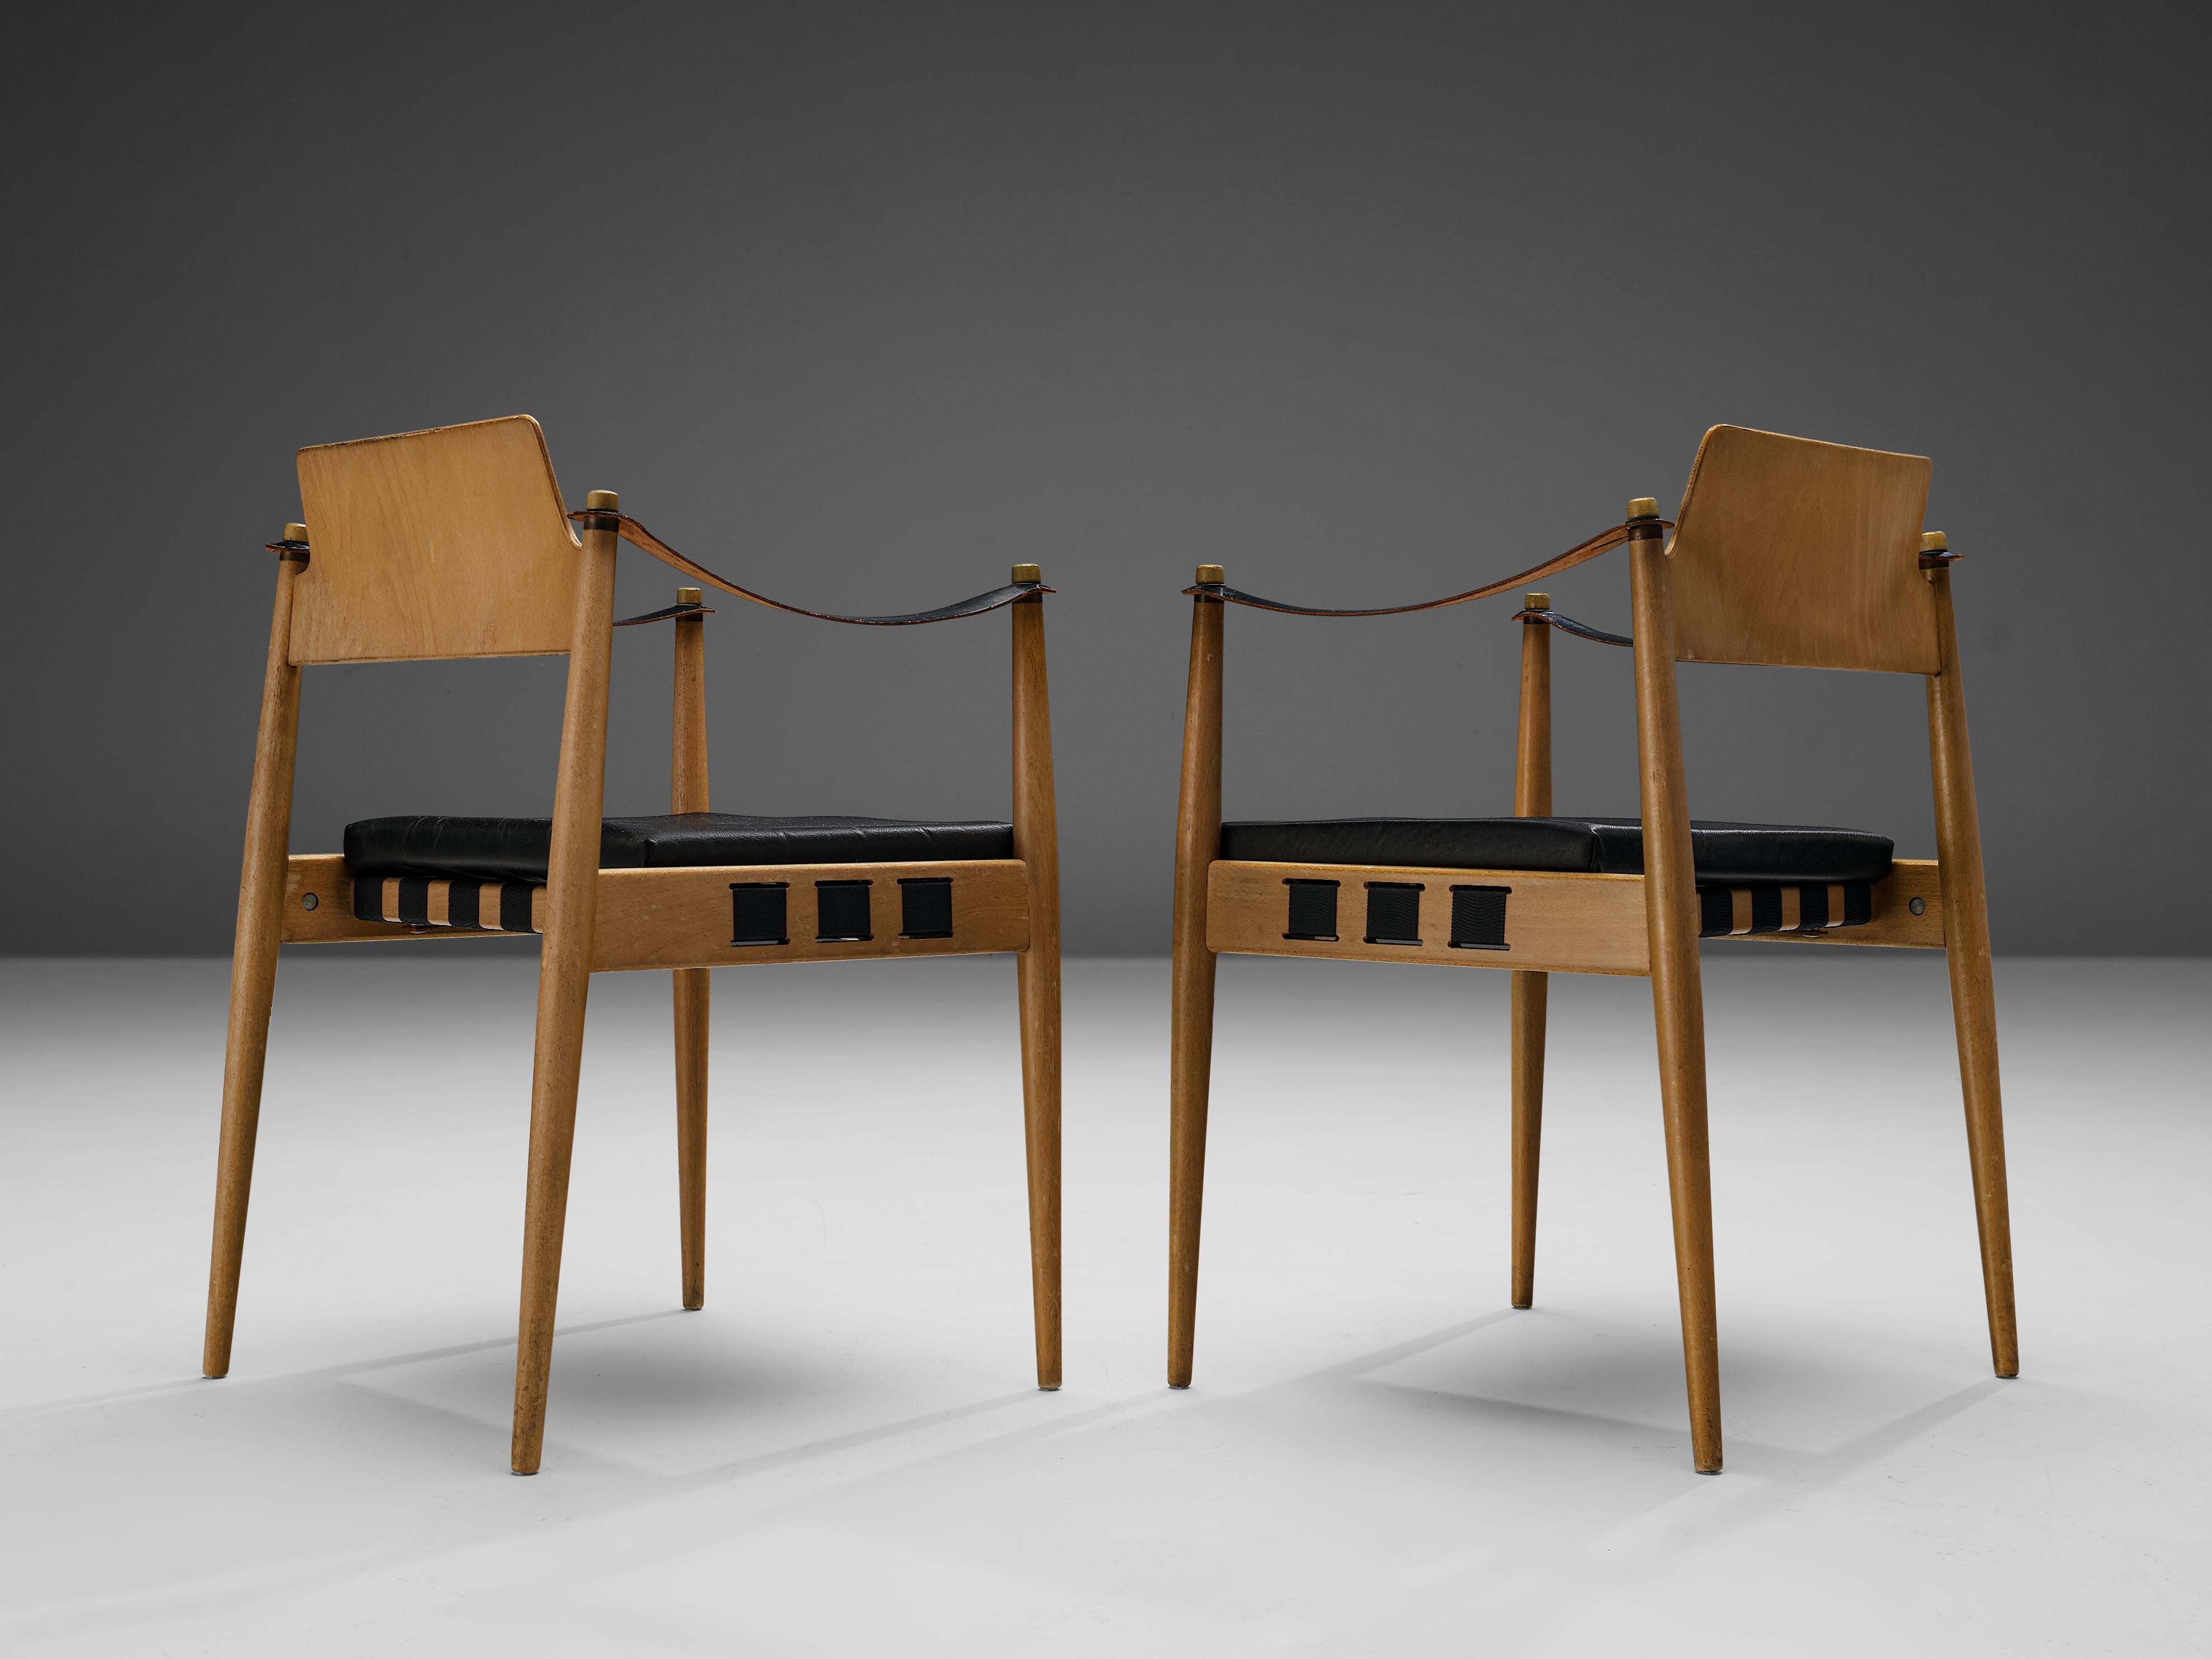 Egon Eiermann for Wilde and Spieth, pair of armchairs, beech, leather, leatherette, Germany, 1960s

Pair of armchairs designed by famous postwar German architect Egon Eiermann in the 1960s. These chairs feature armrests made out of a black leather